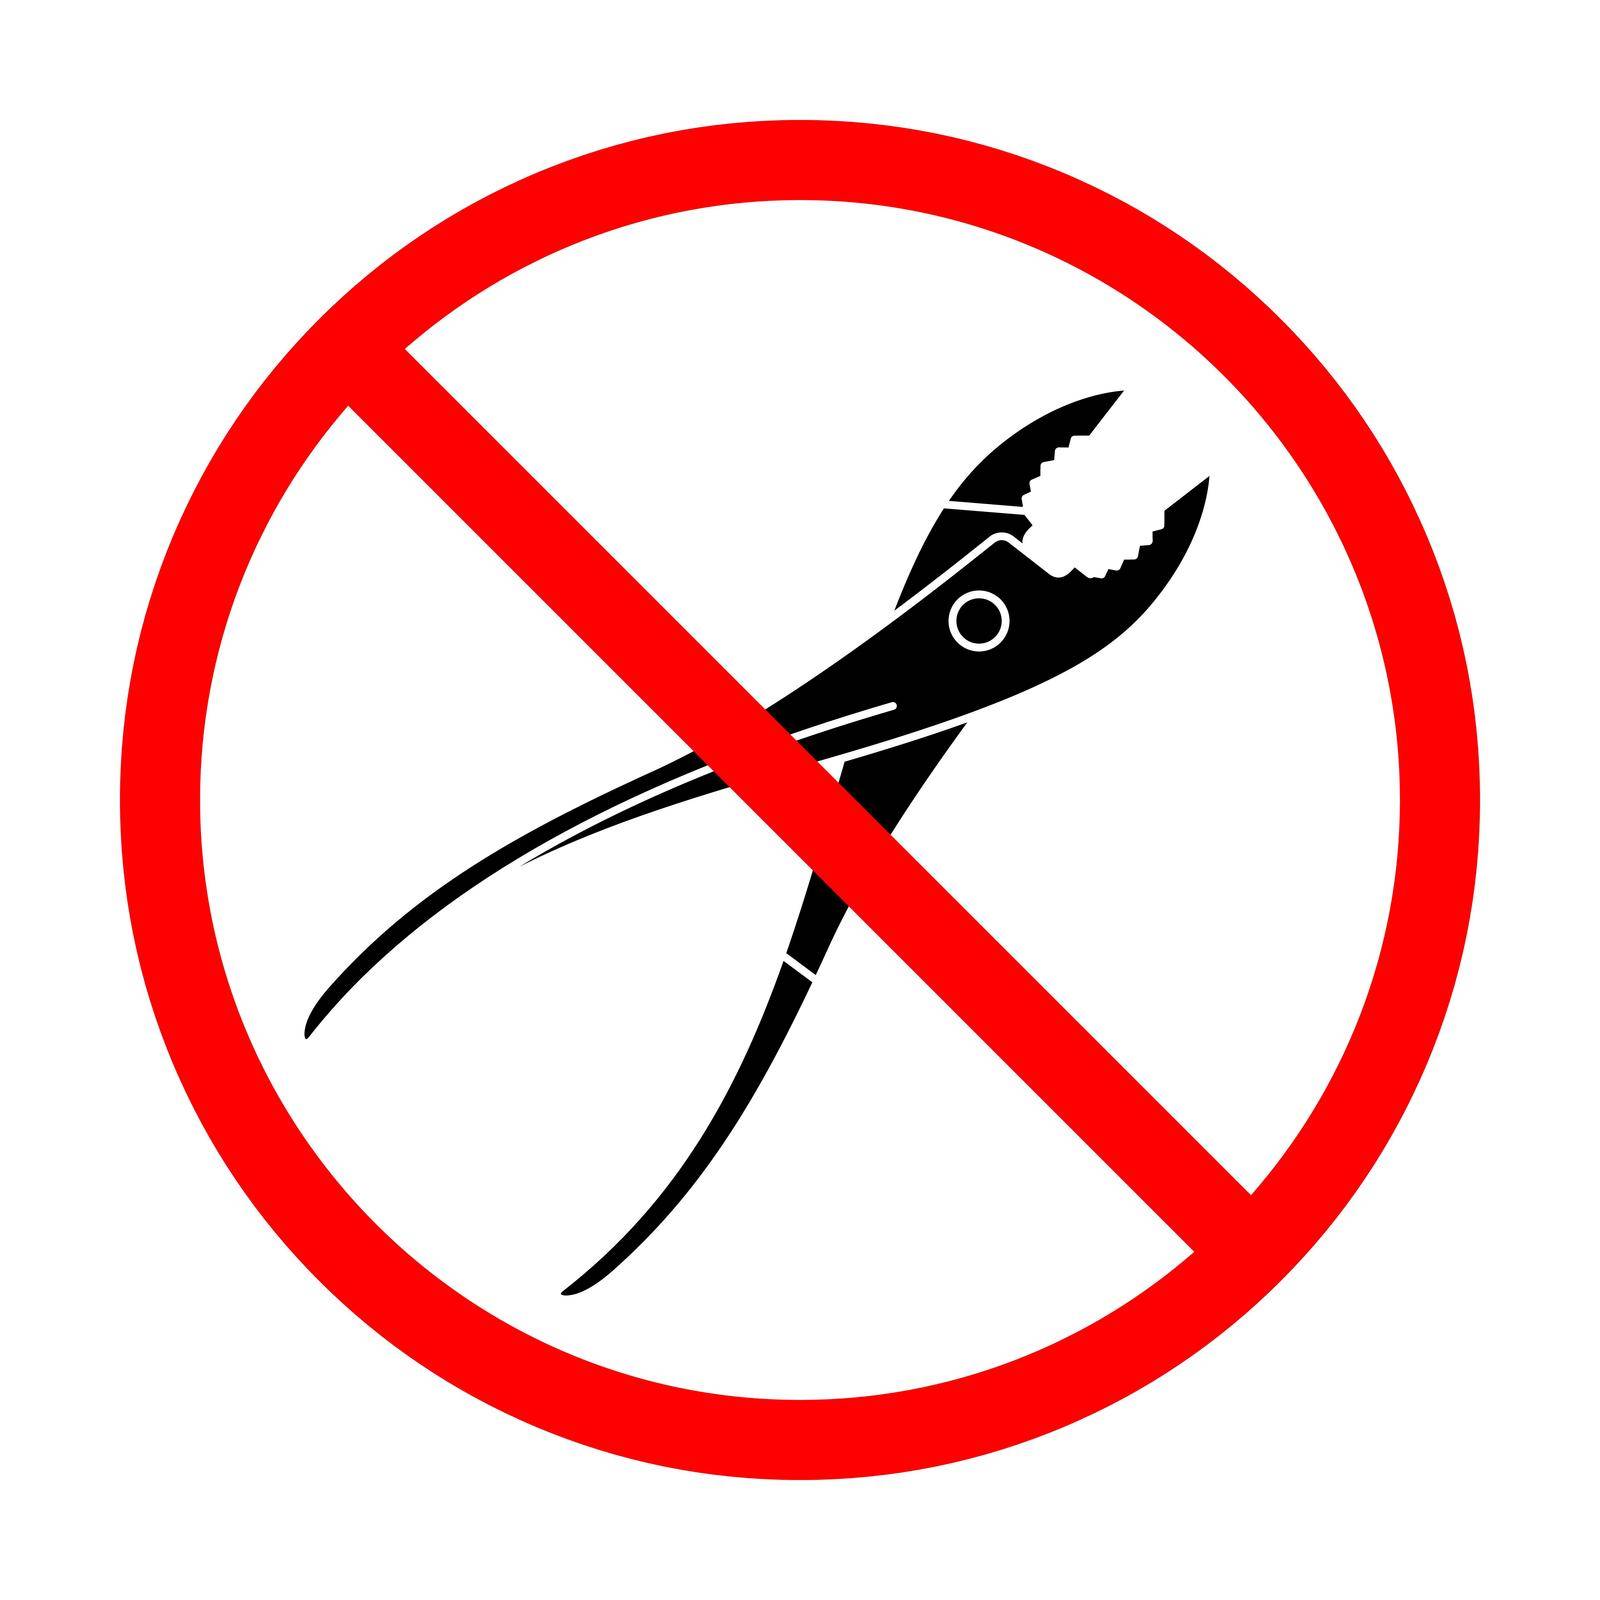 Pliers ban sign. Pliers is forbidden. Prohibited sign of Pliers. by Chekman